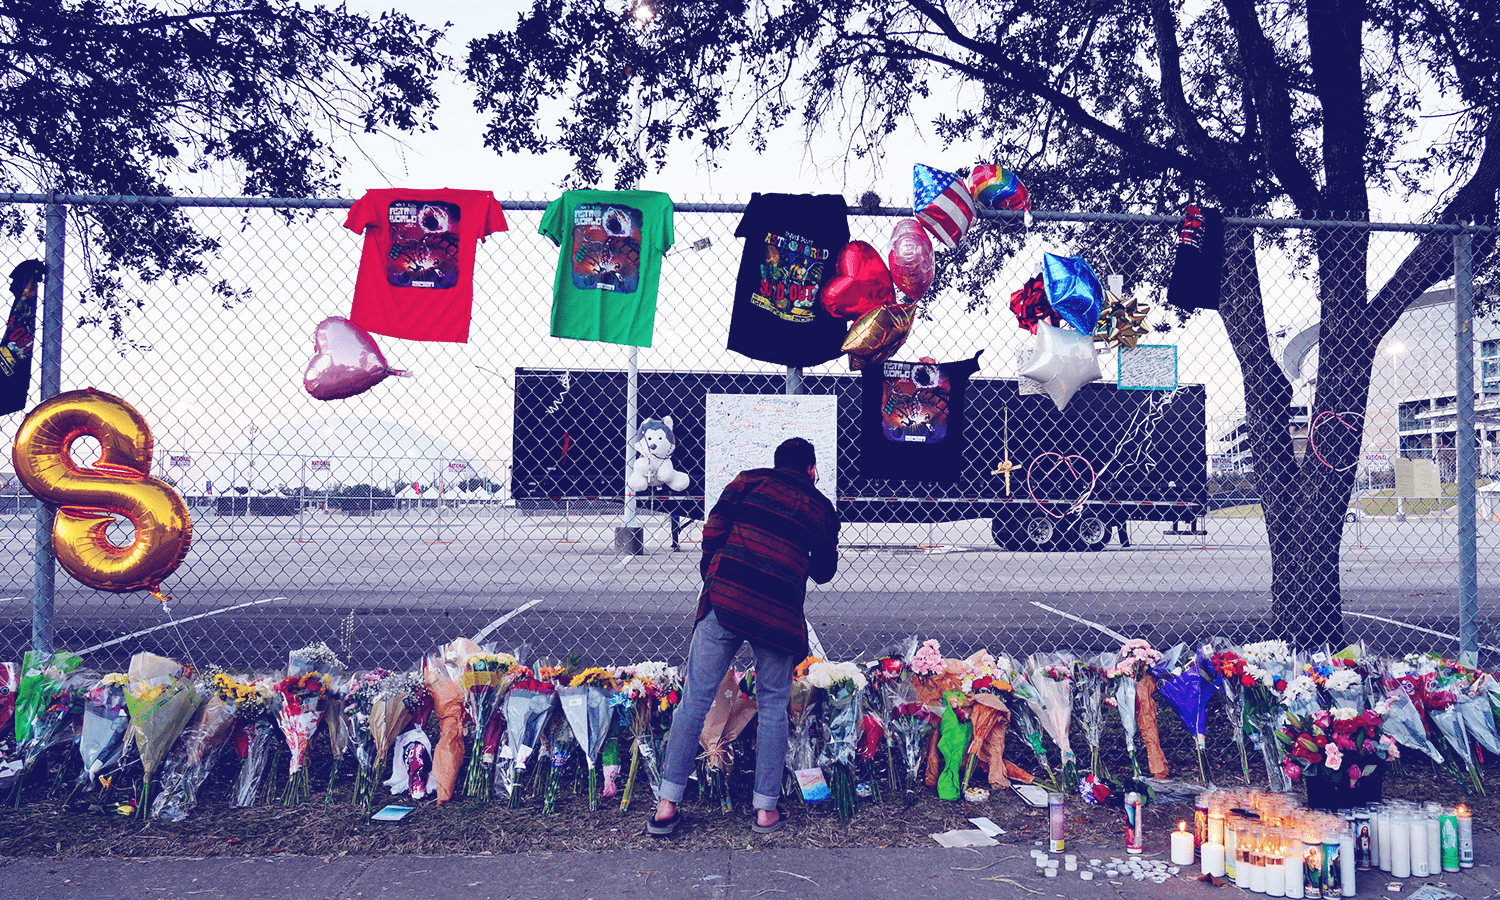 A VISITOR WRITES A NOTE AT A MEMORIAL OUTSIDE OF THE CANCELED ASTROWORLD FESTIVAL AT NRG PARK IN HOUSTON, TEXAS